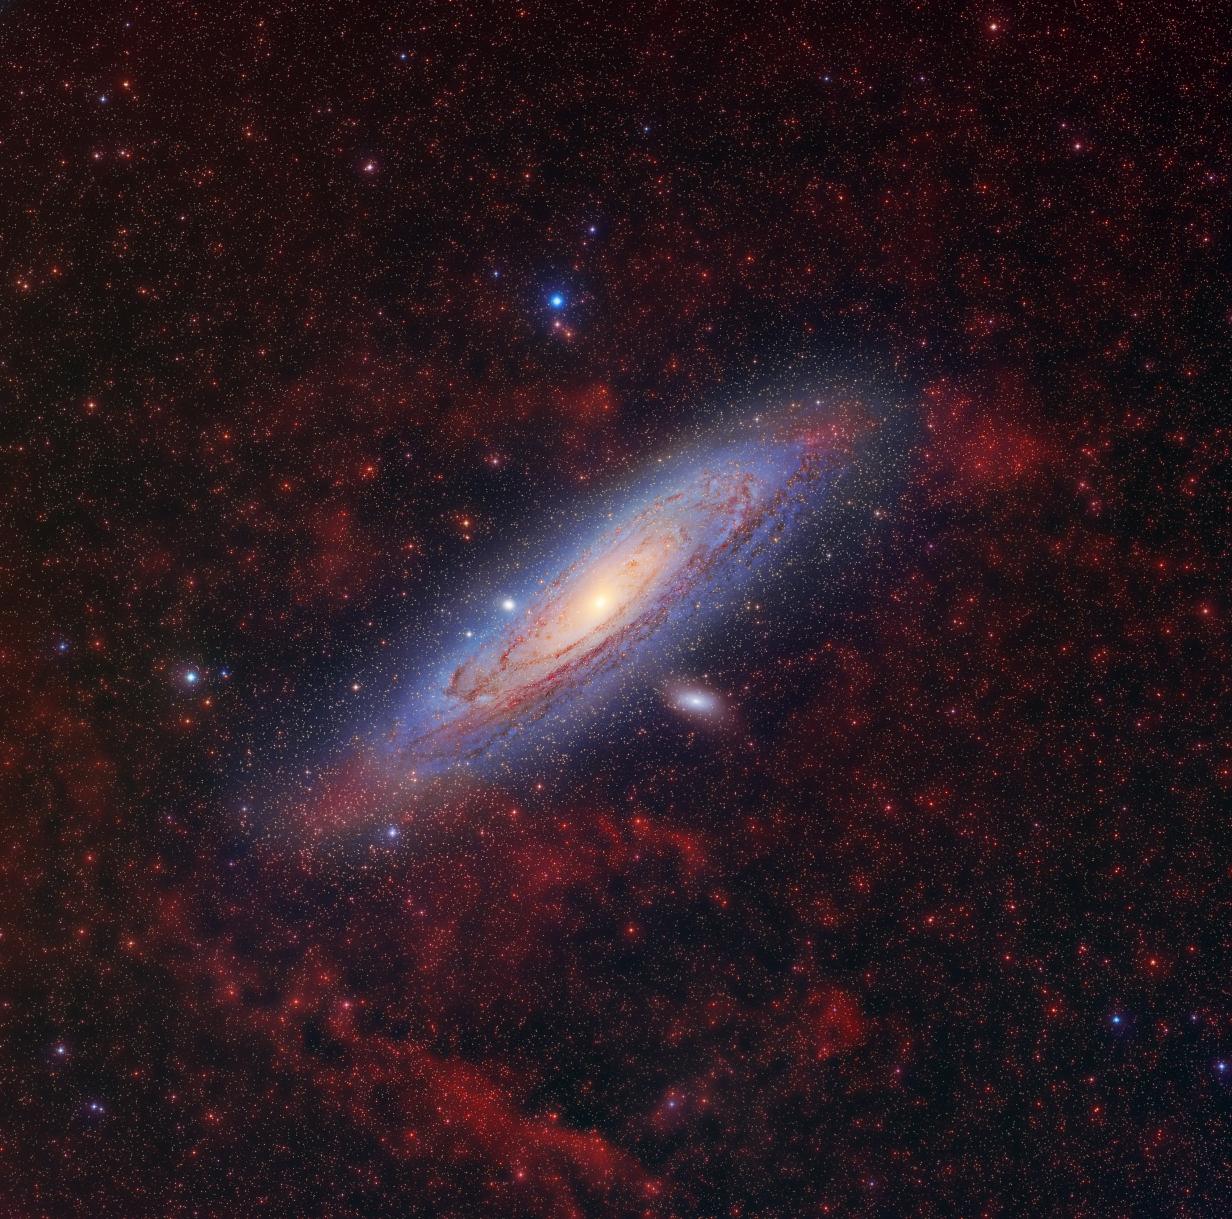 Andromeda Spiral Galaxy (M31) and Satellite Galaxies (M110 and M32)